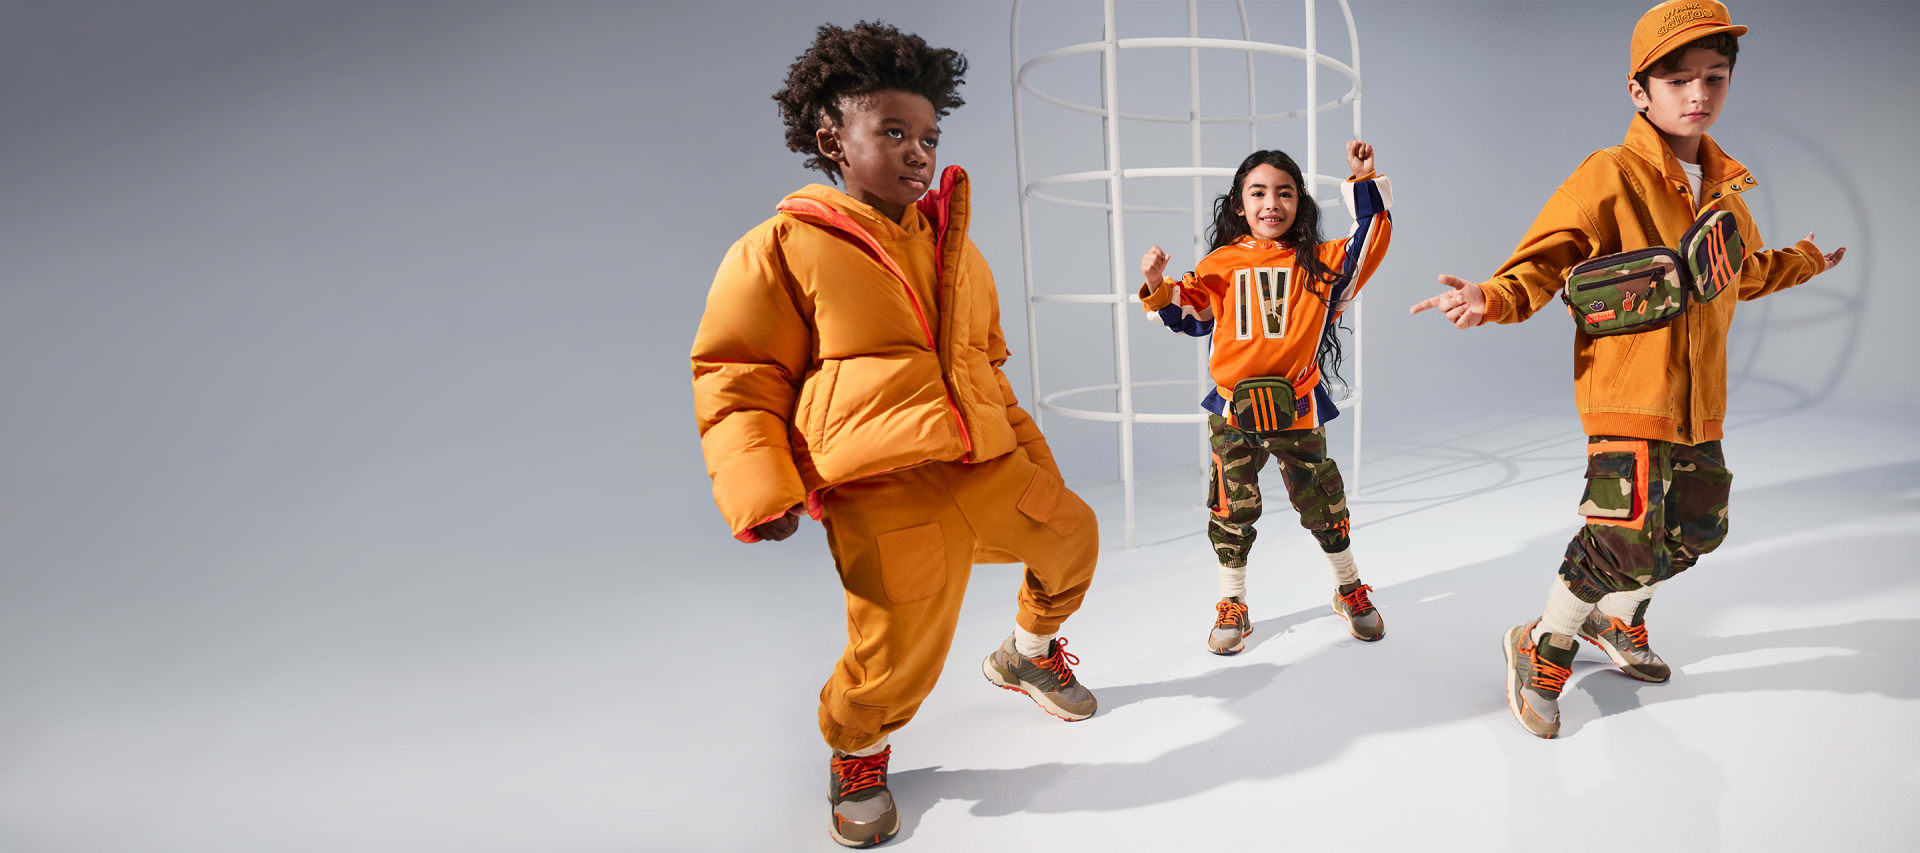 A group of young models are photographed in the adidas x IVY PARK collection.